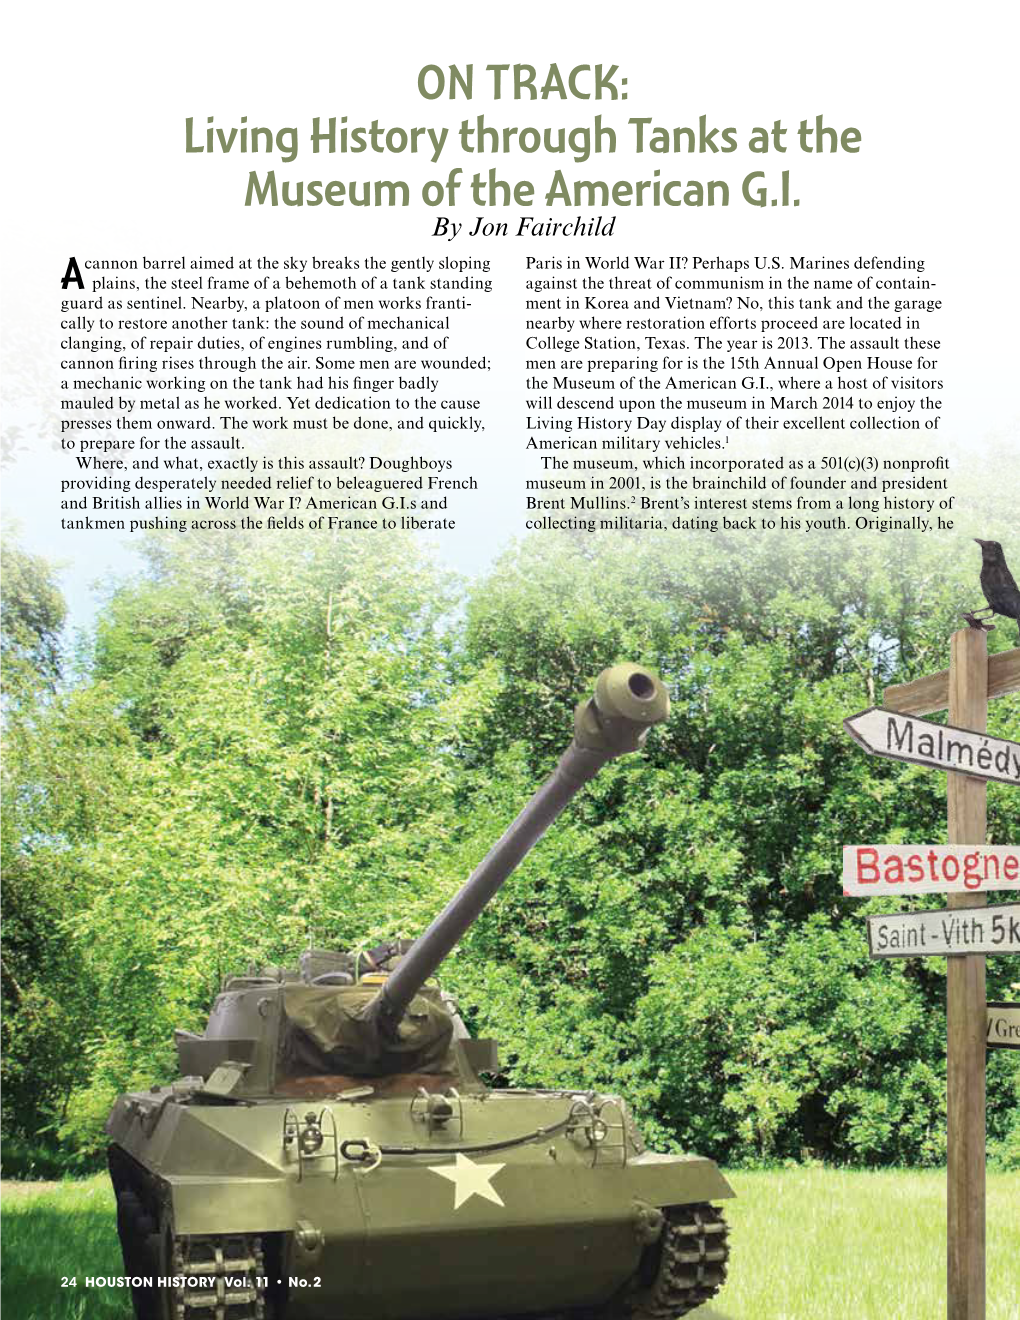 Living History Through Tanks at the Museum of the American GI